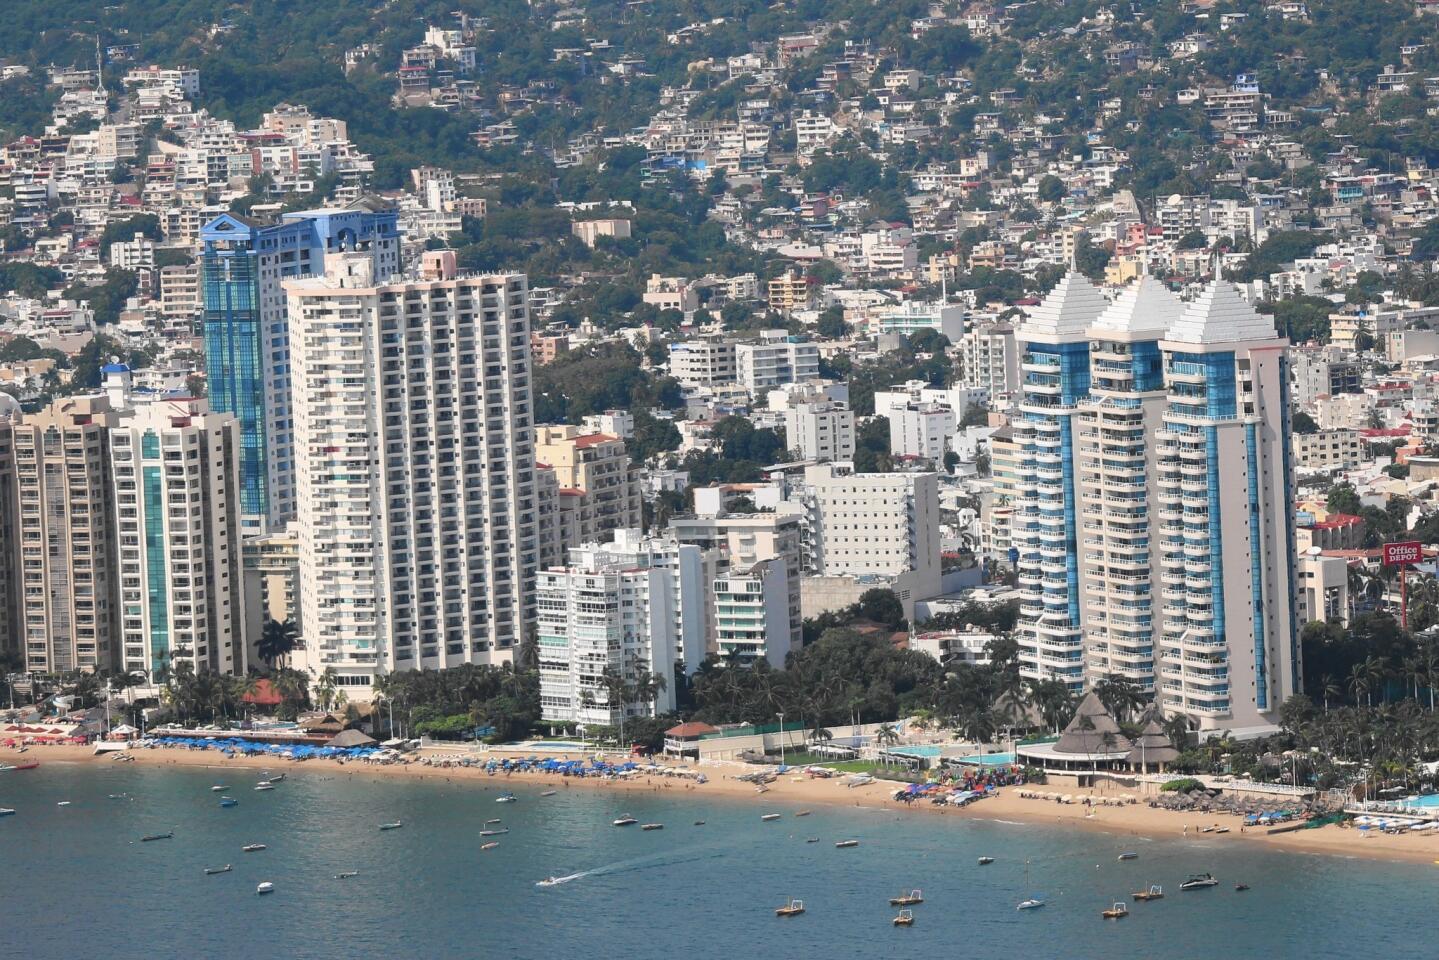 Gleaming beachside hotels and residences on Acapulco Bay -- seen from a distance -- suggest a sense of jet-set glamour. At night, the view is spectacular as ever.